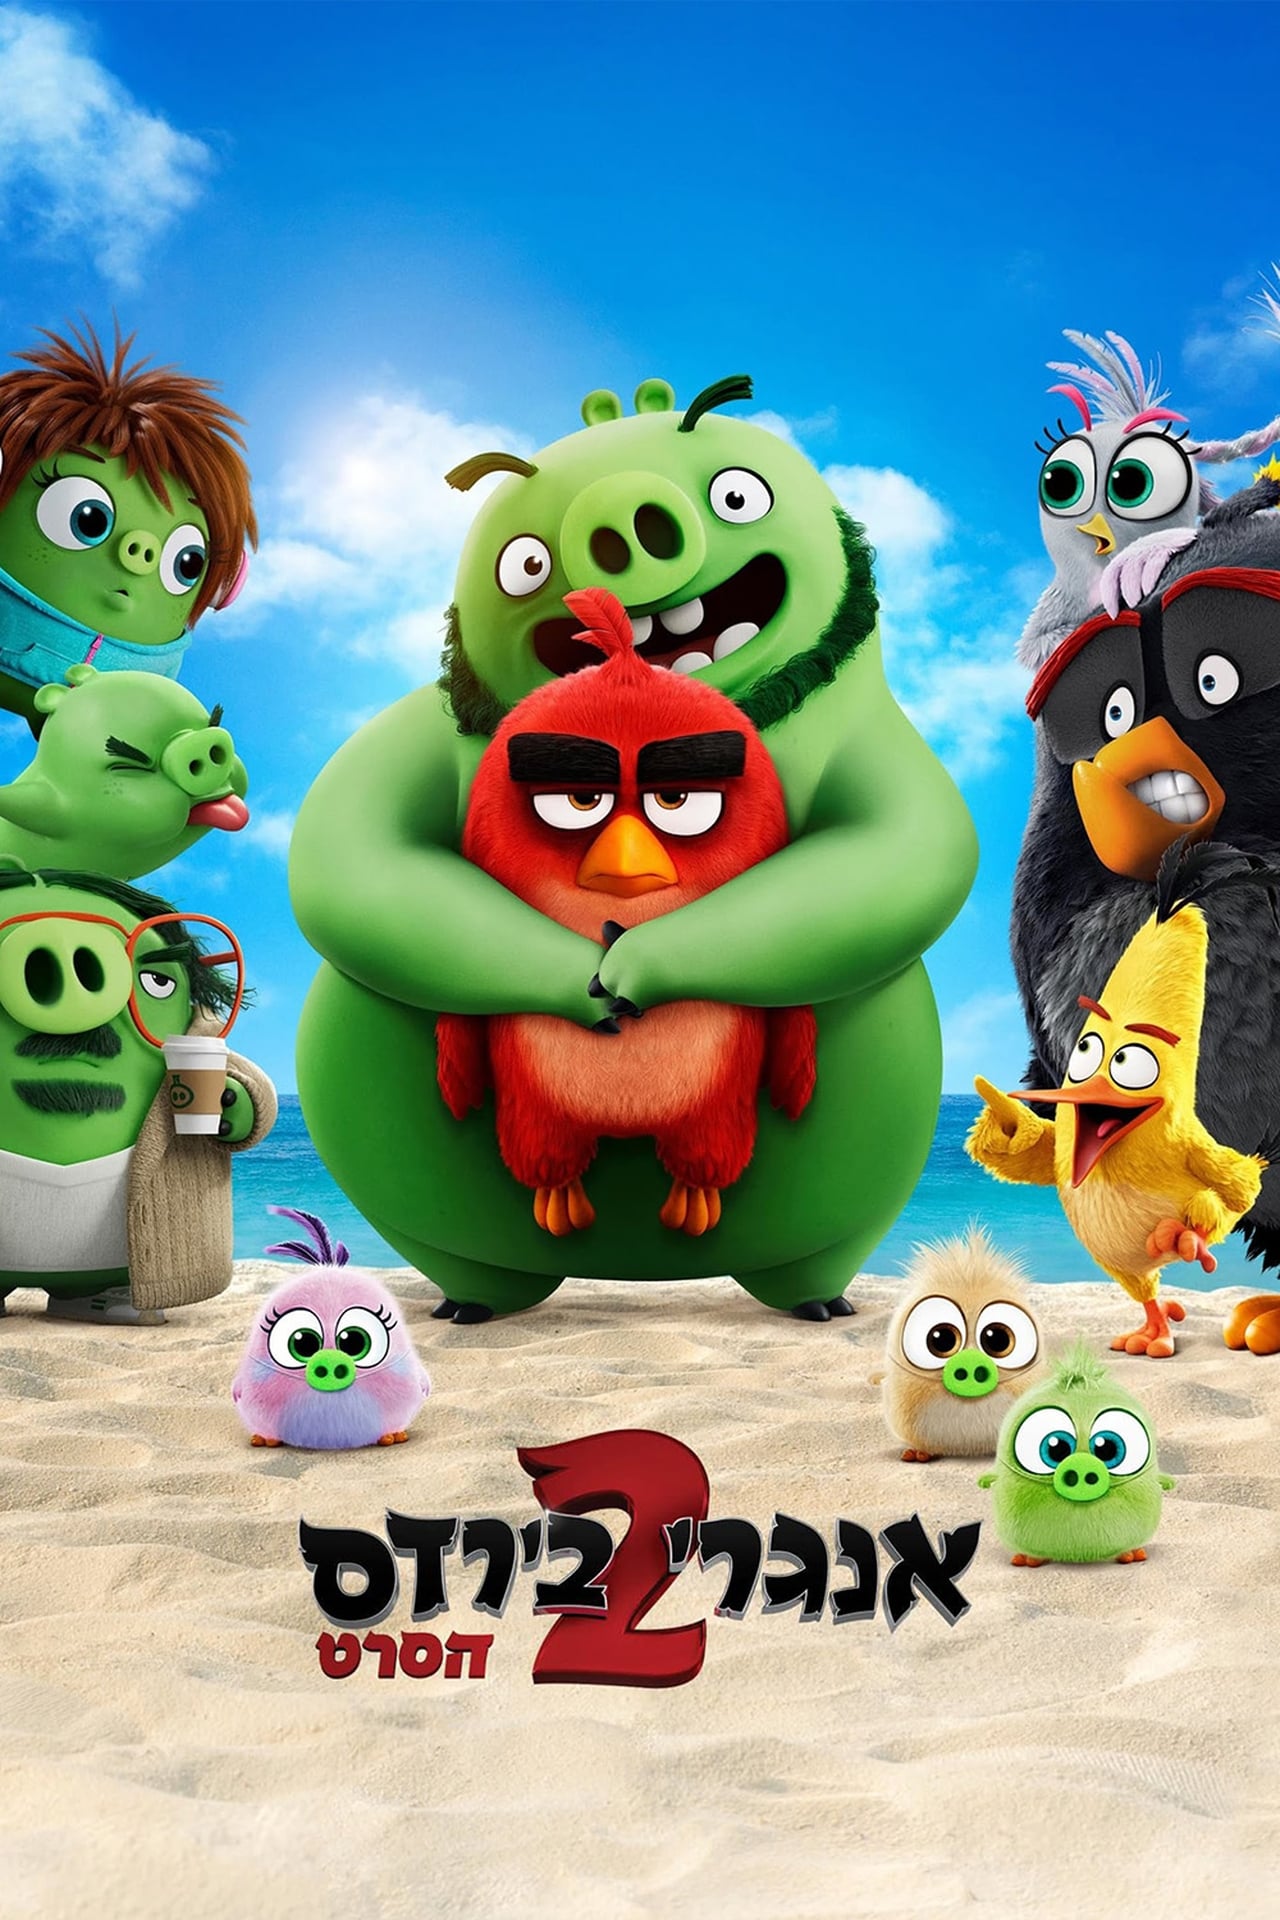 angry birds 2 movie full download